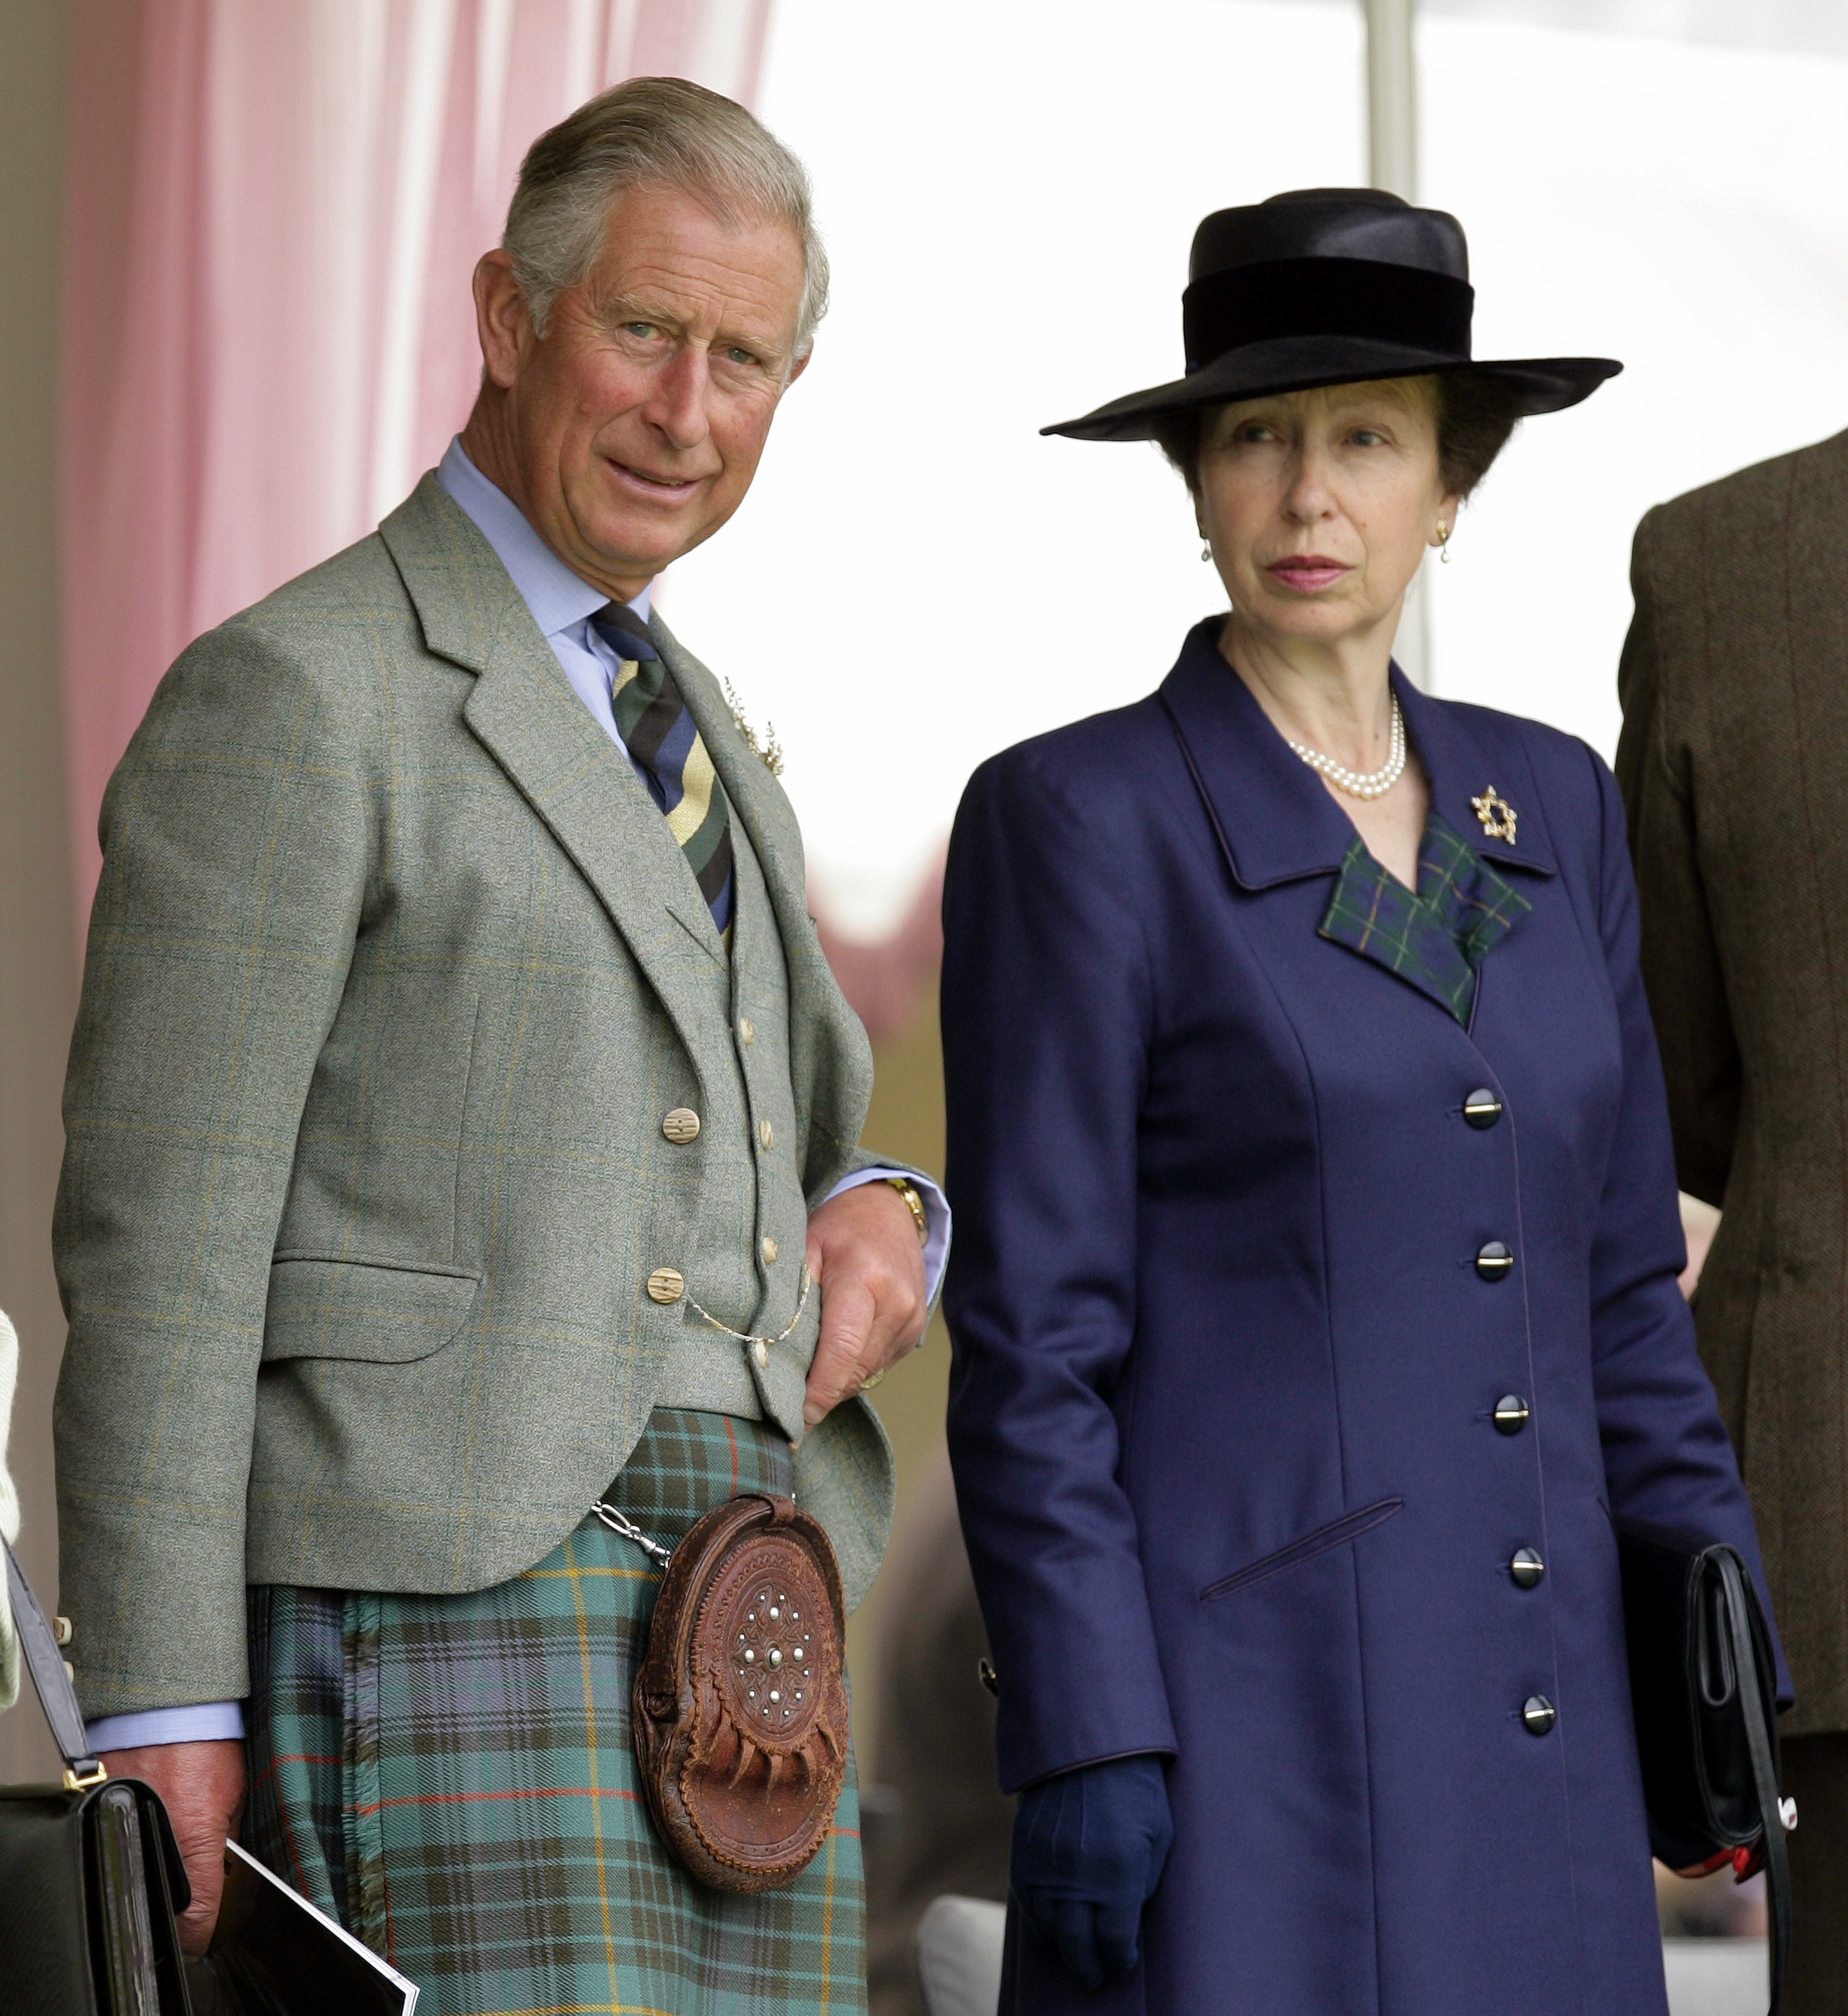 Prince Charles' Sister — Learn Fun Facts About Princess Anne!